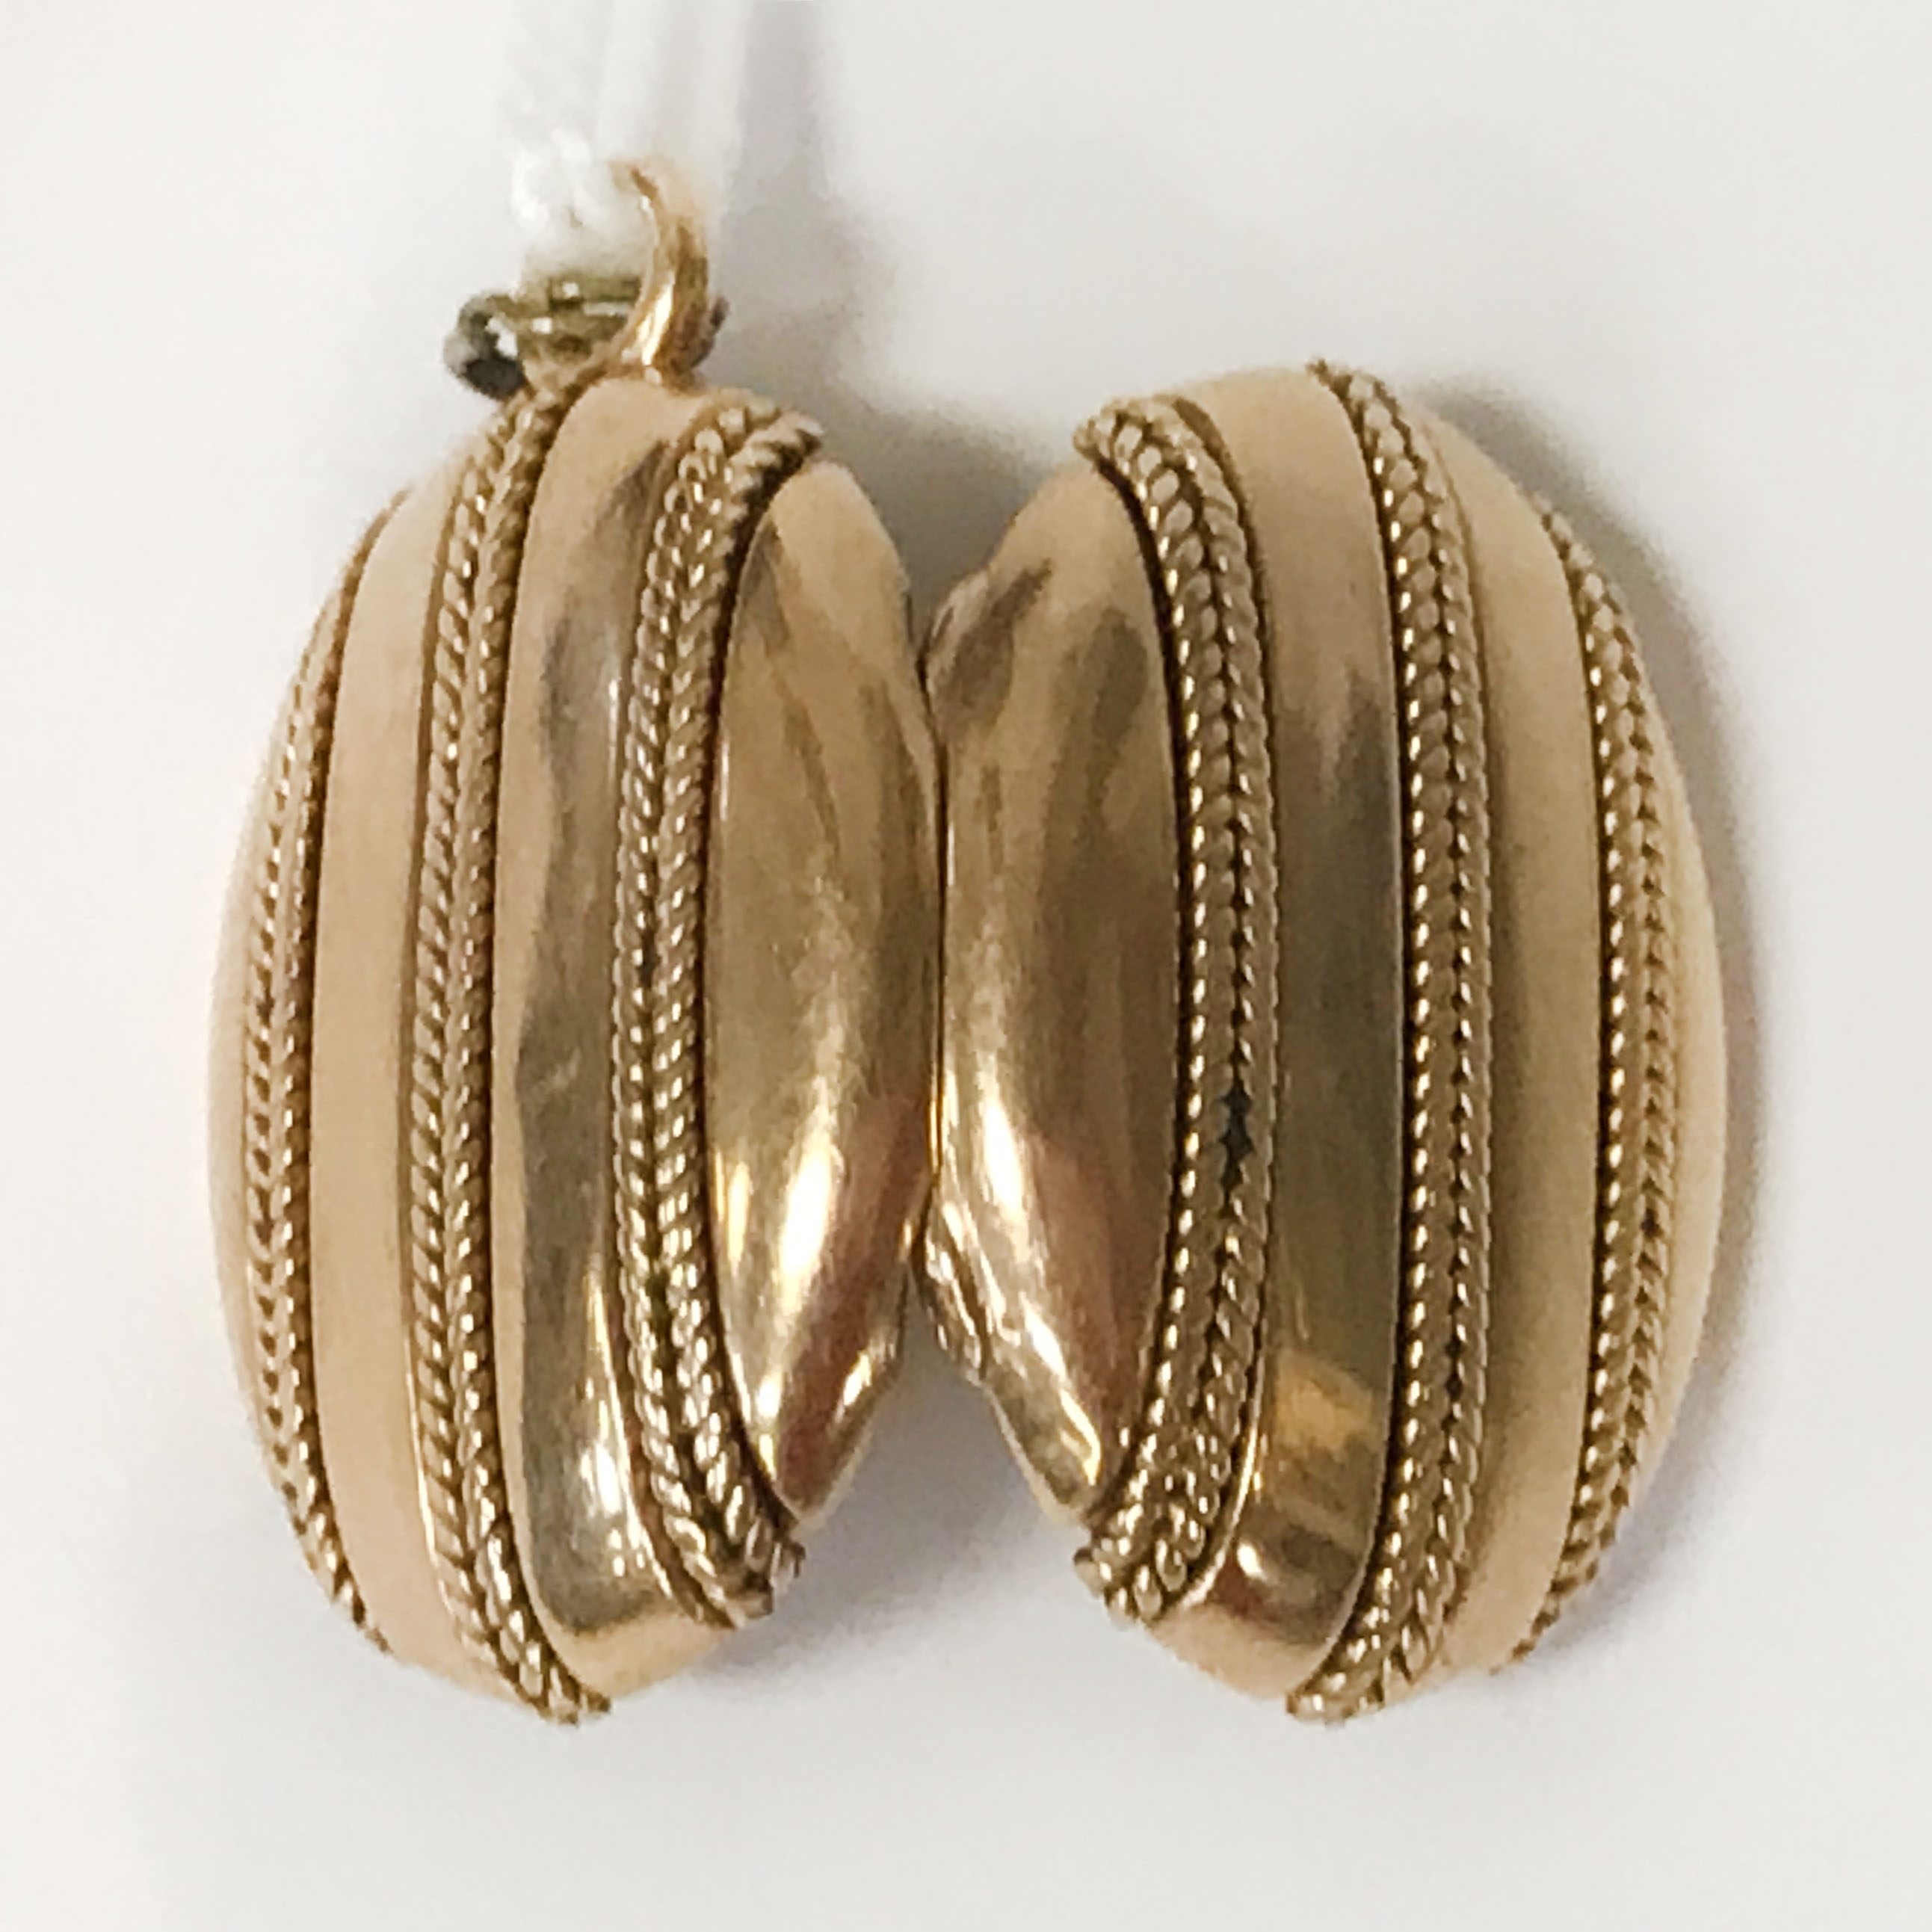 HIGH CARAT GOLD LOCKET - POSSIBLY 18CT - 10.5 grams - Image 2 of 3